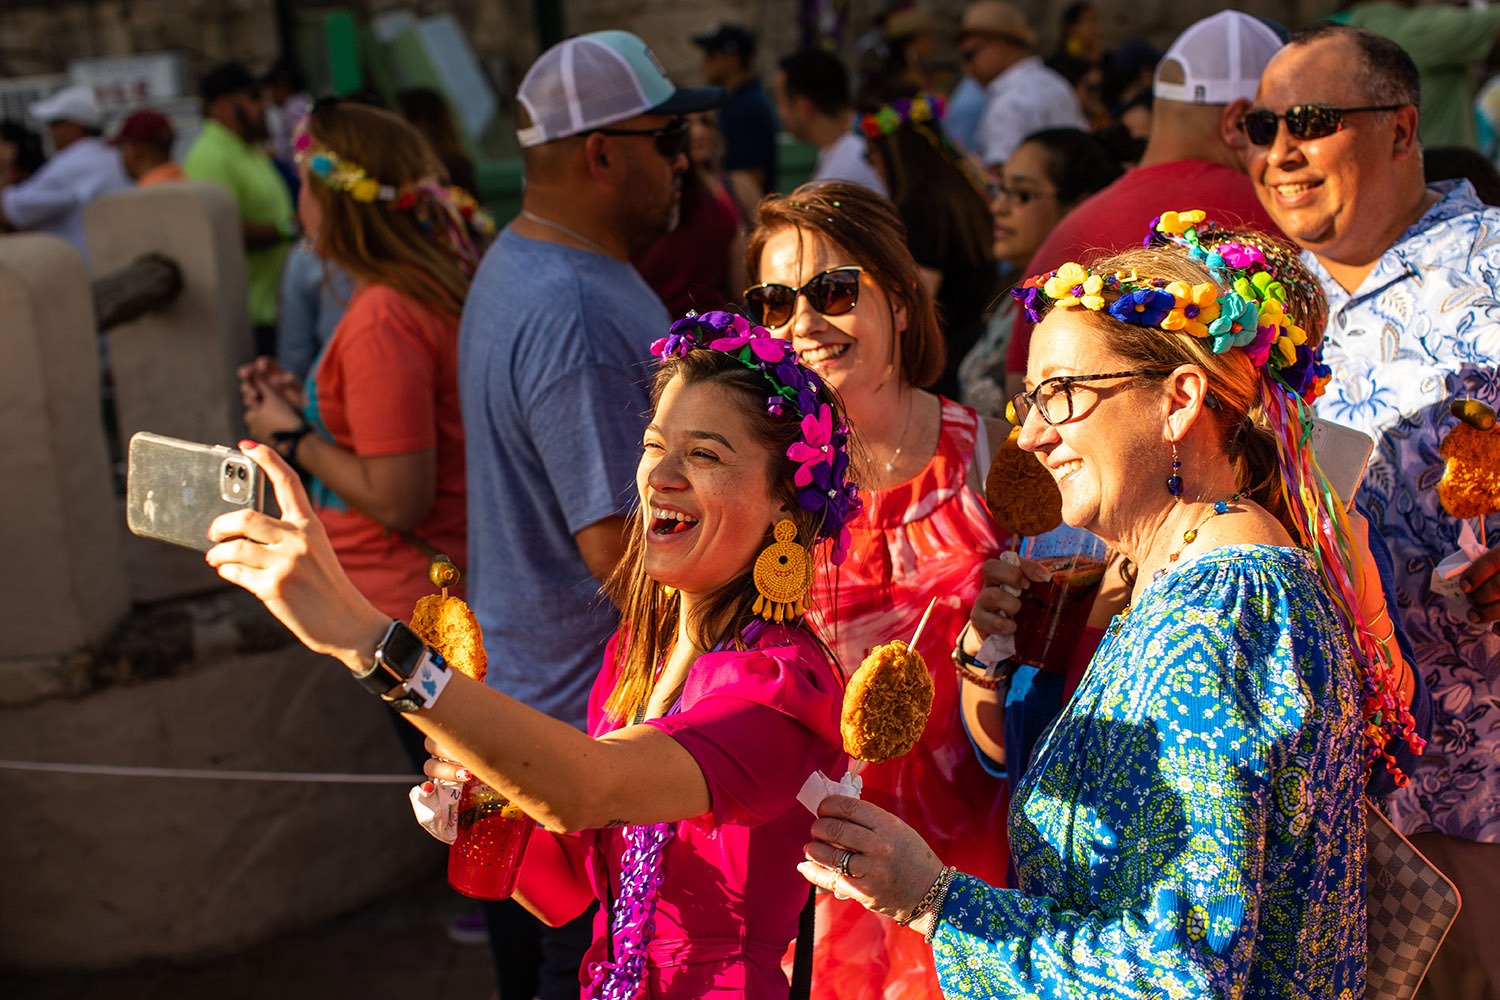 Thousands of people attend A Night in Old San Antonio, or NIOSA, during Fiesta on Wednesday, April 6, 2022, at La Villita in downtown San Antonio, Texas. Photo by Kaylee Greenlee Beal | Heron contributor